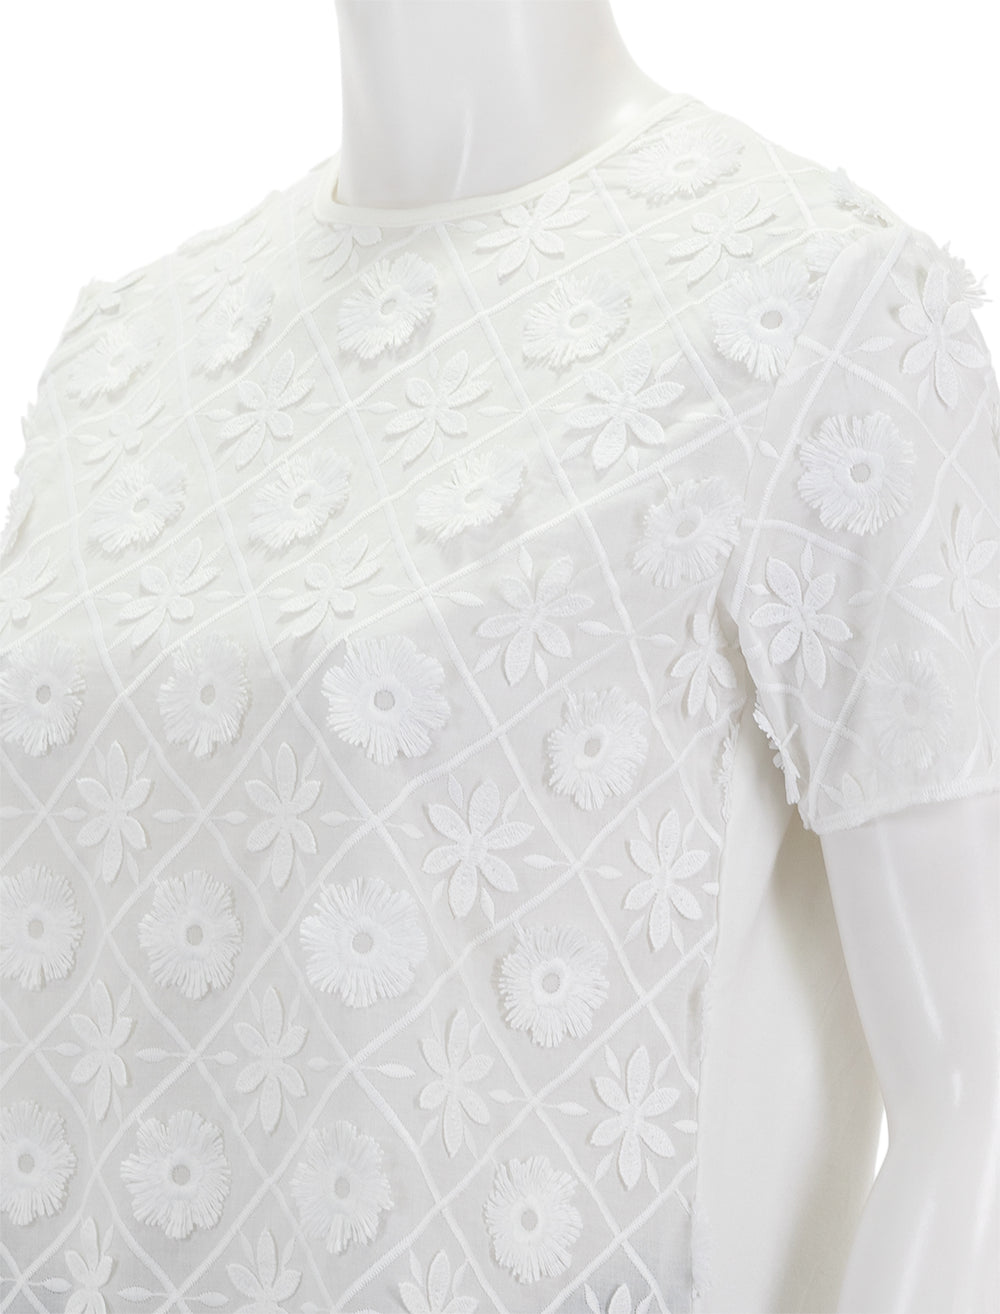 Close-up view of Vilagallo's darzie top in ivory.